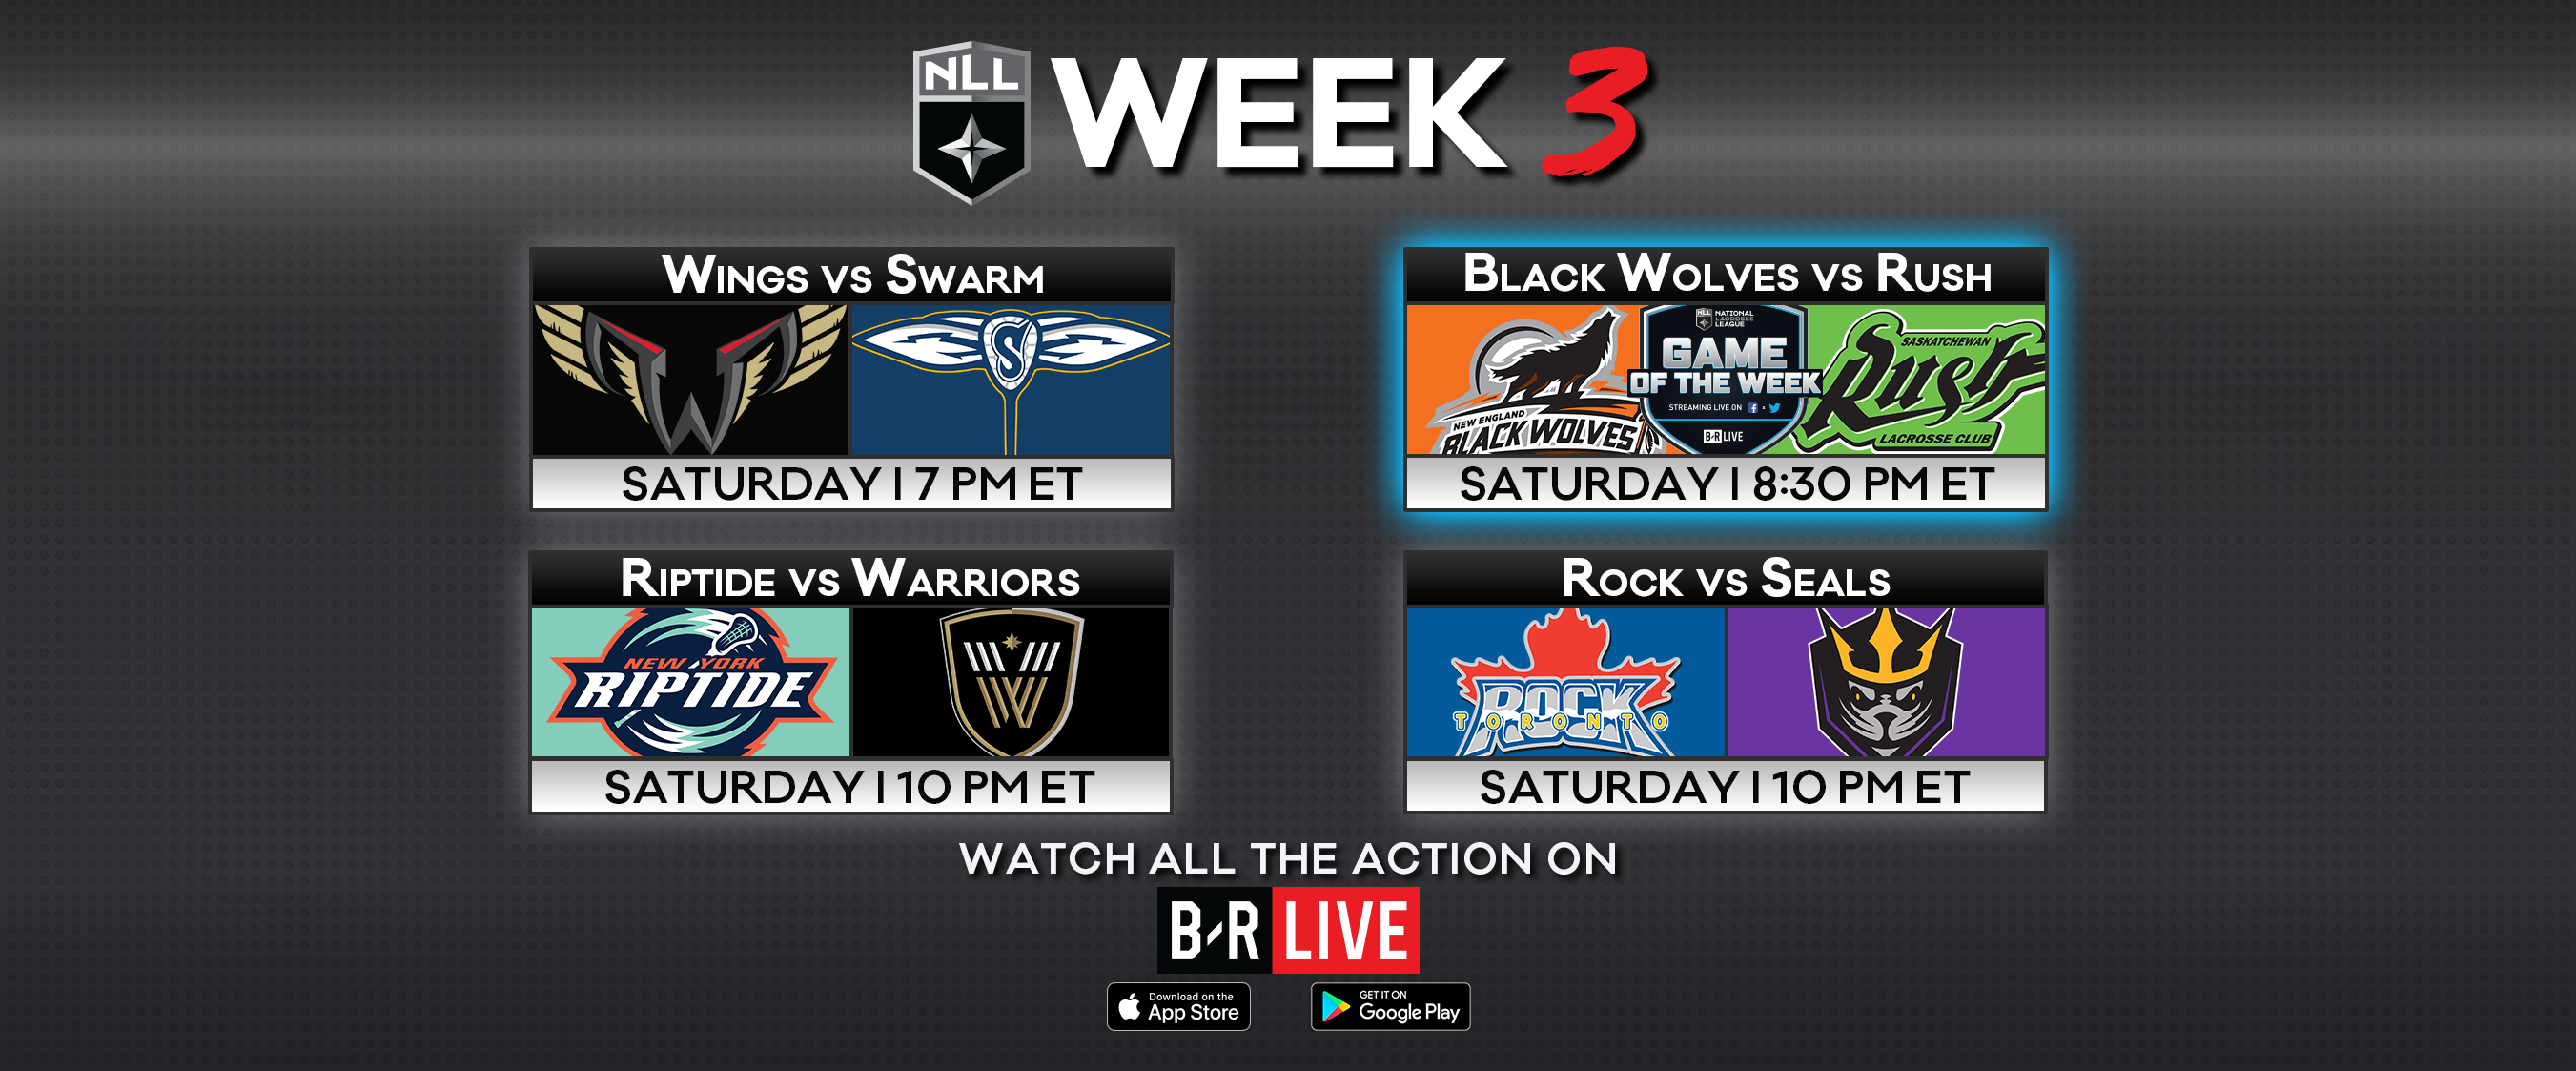 Week 3 Schedule, Game Info, How to Watch NLL